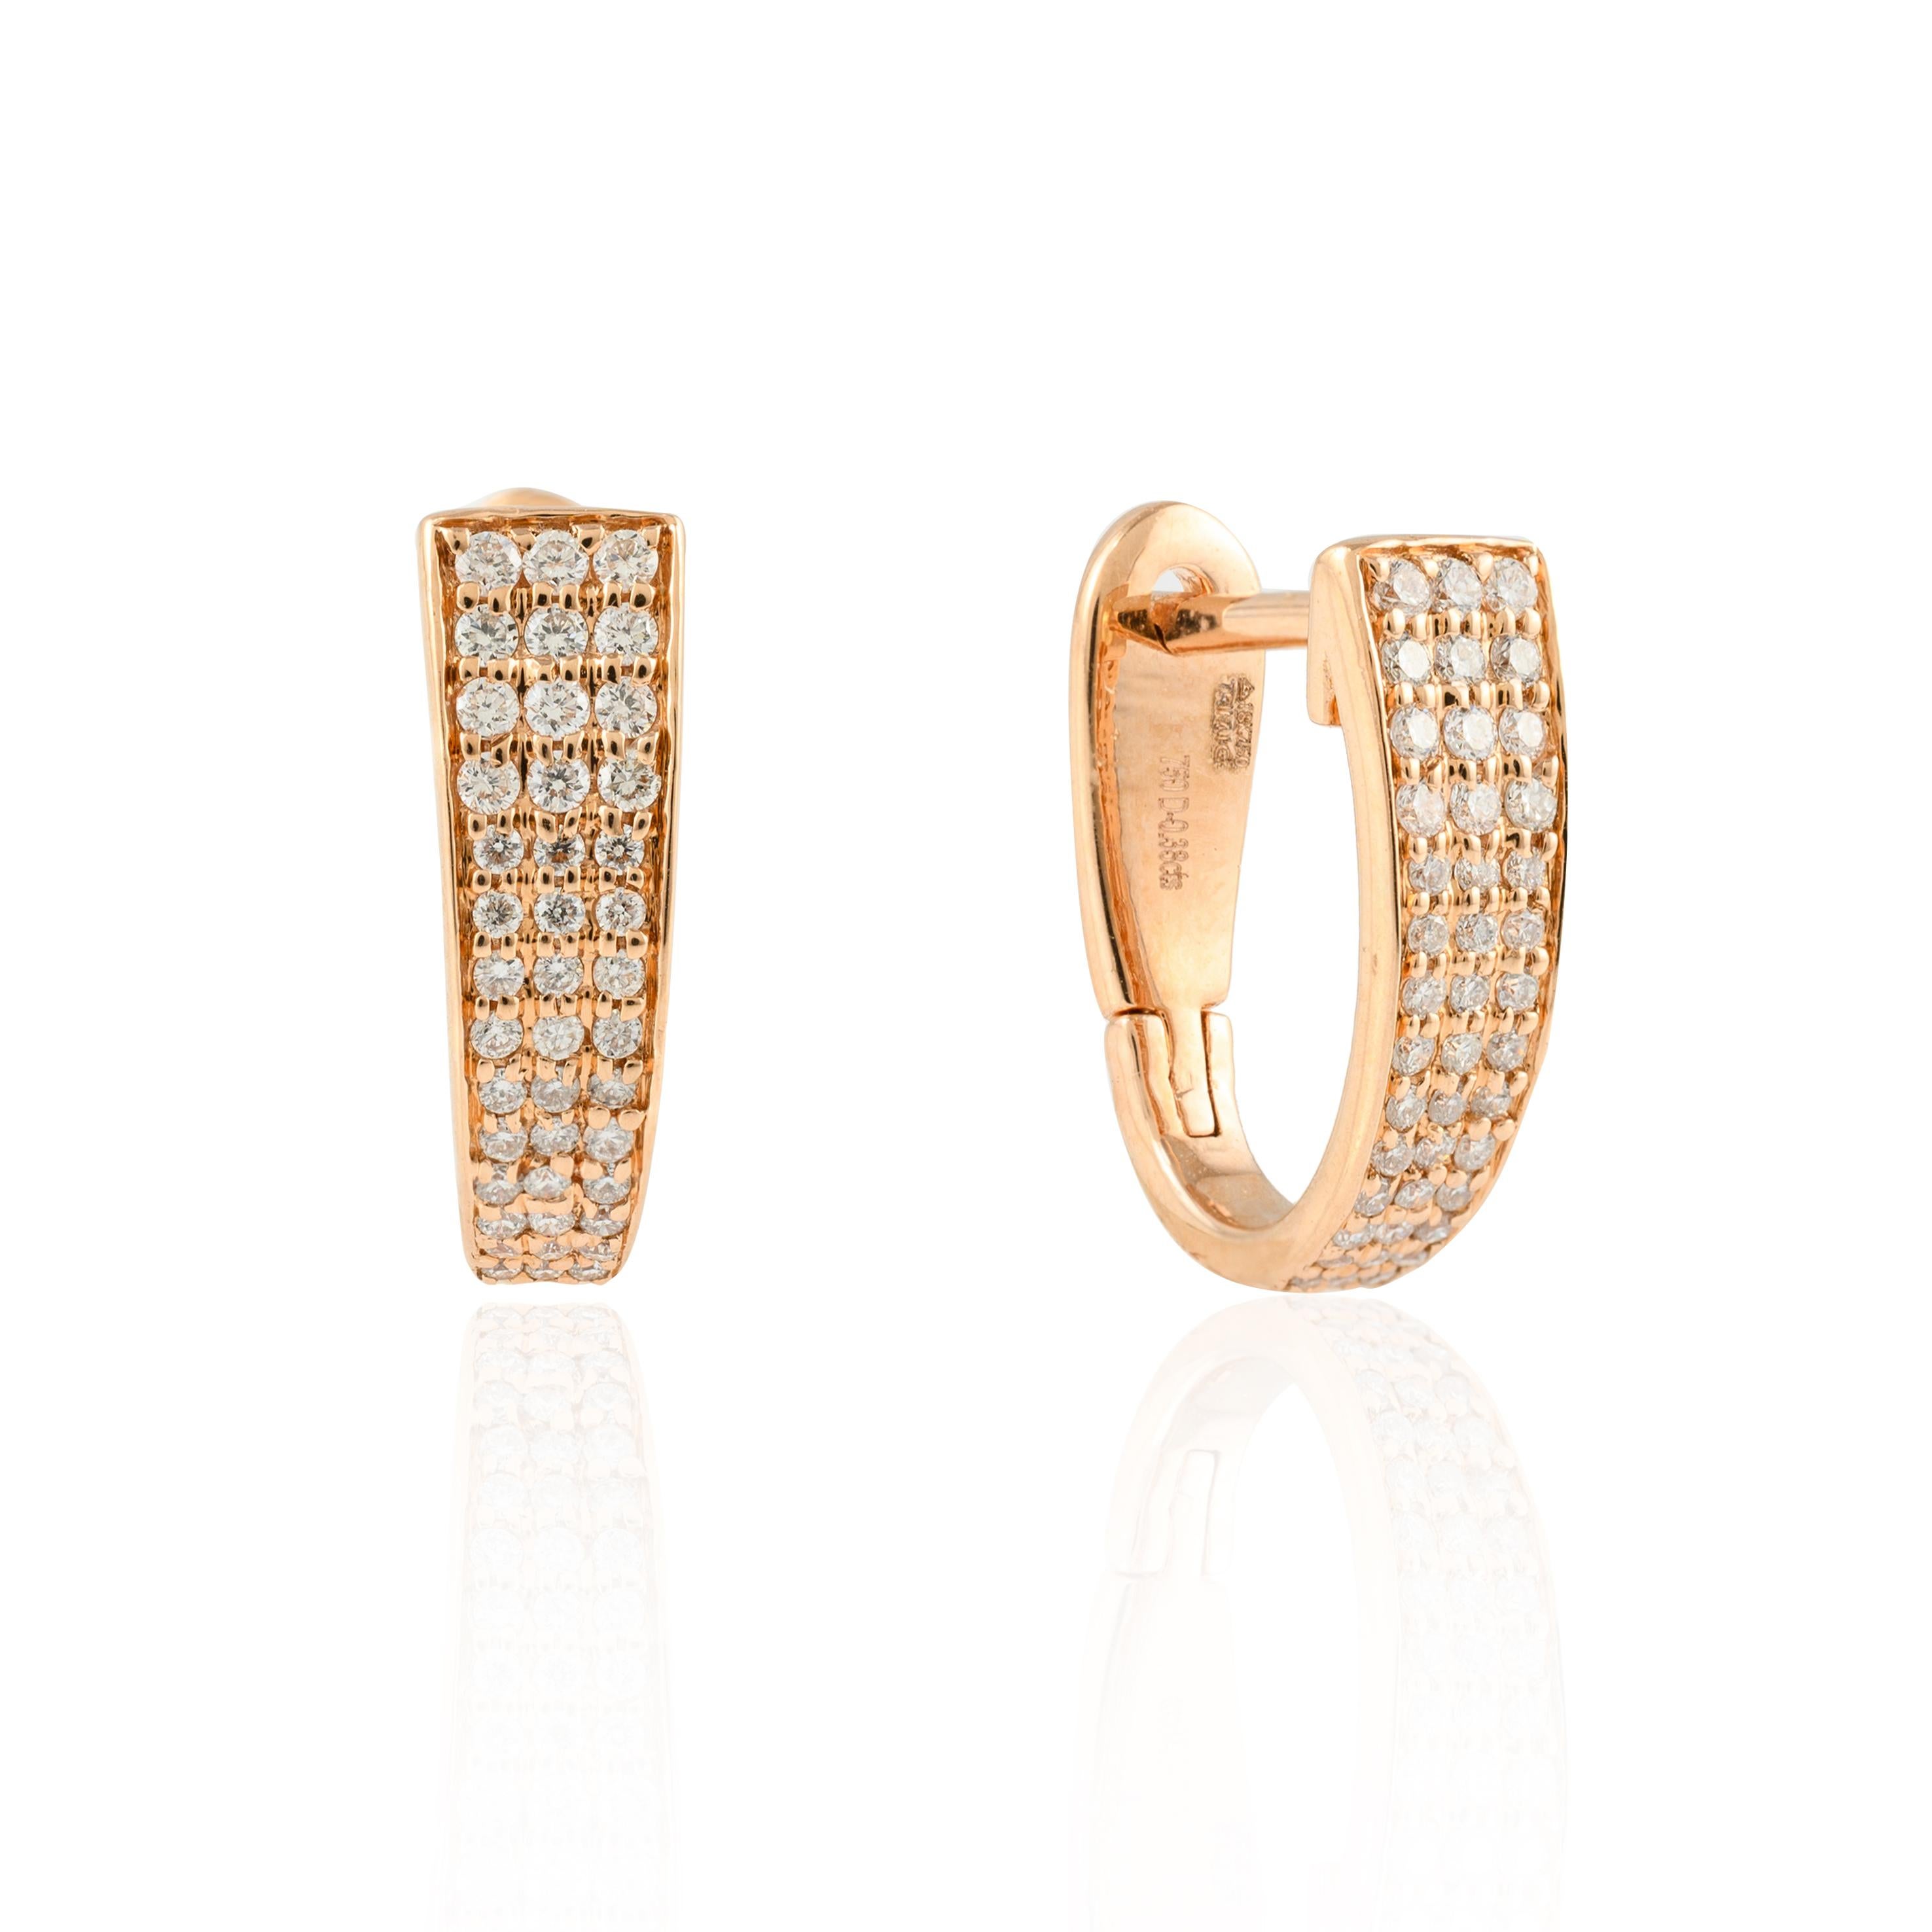 Diamond Earrings Everyday Fine Jewelry For Women in 18k Solid Rose Gold In New Condition For Sale In Houston, TX